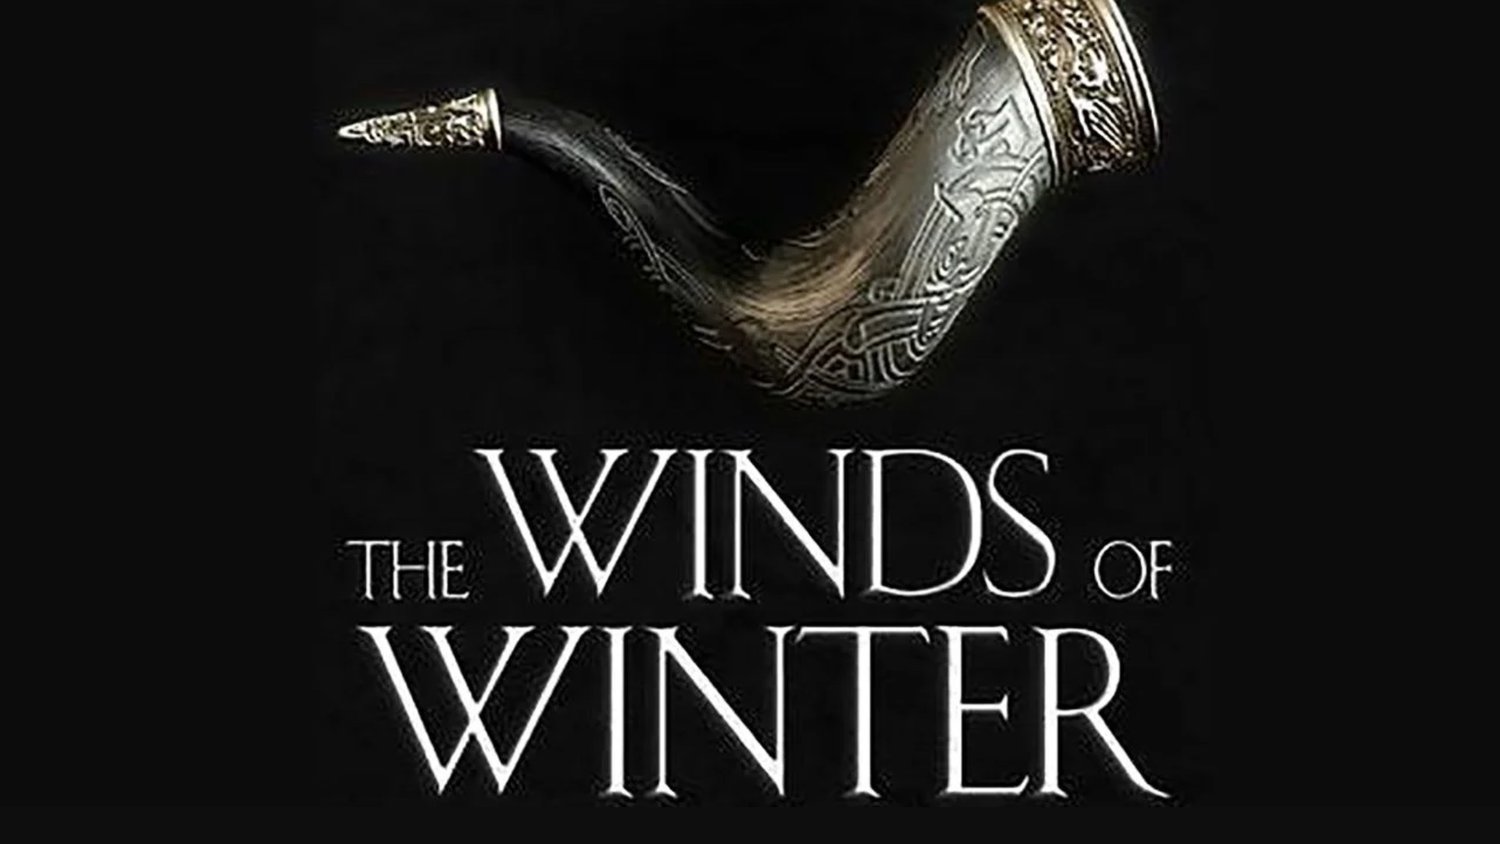 George R.R. Martin's The Winds of Winter cover